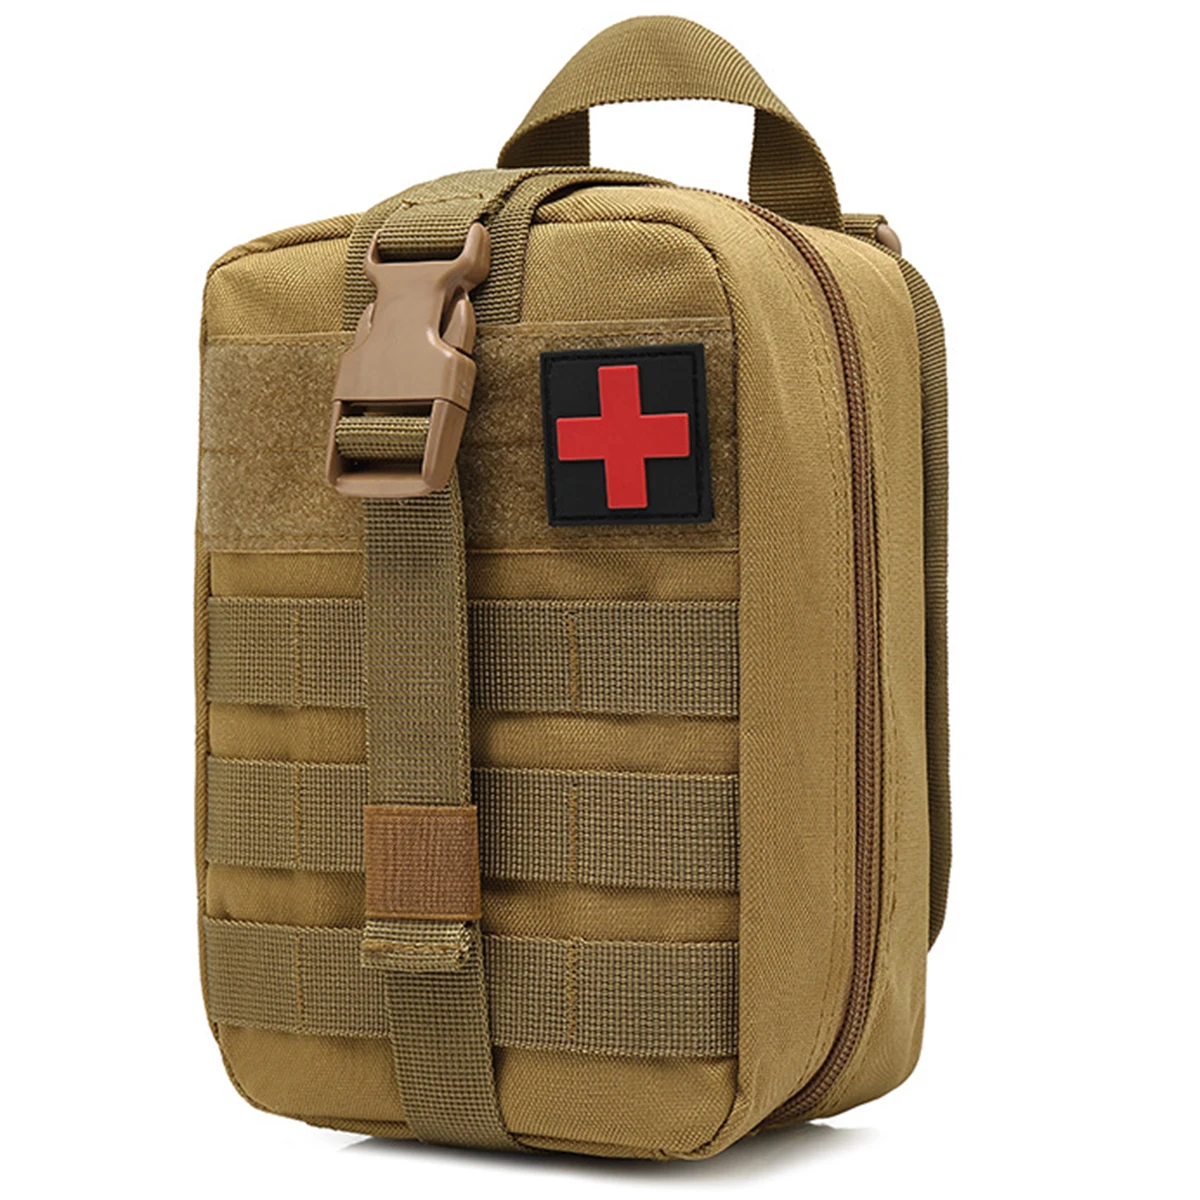 Tactical Rip Away Molle IFAK Pouch, Utility Trauma EMT Medical First Aid Pouch Empty for Outdoor Camping Travel Hunting